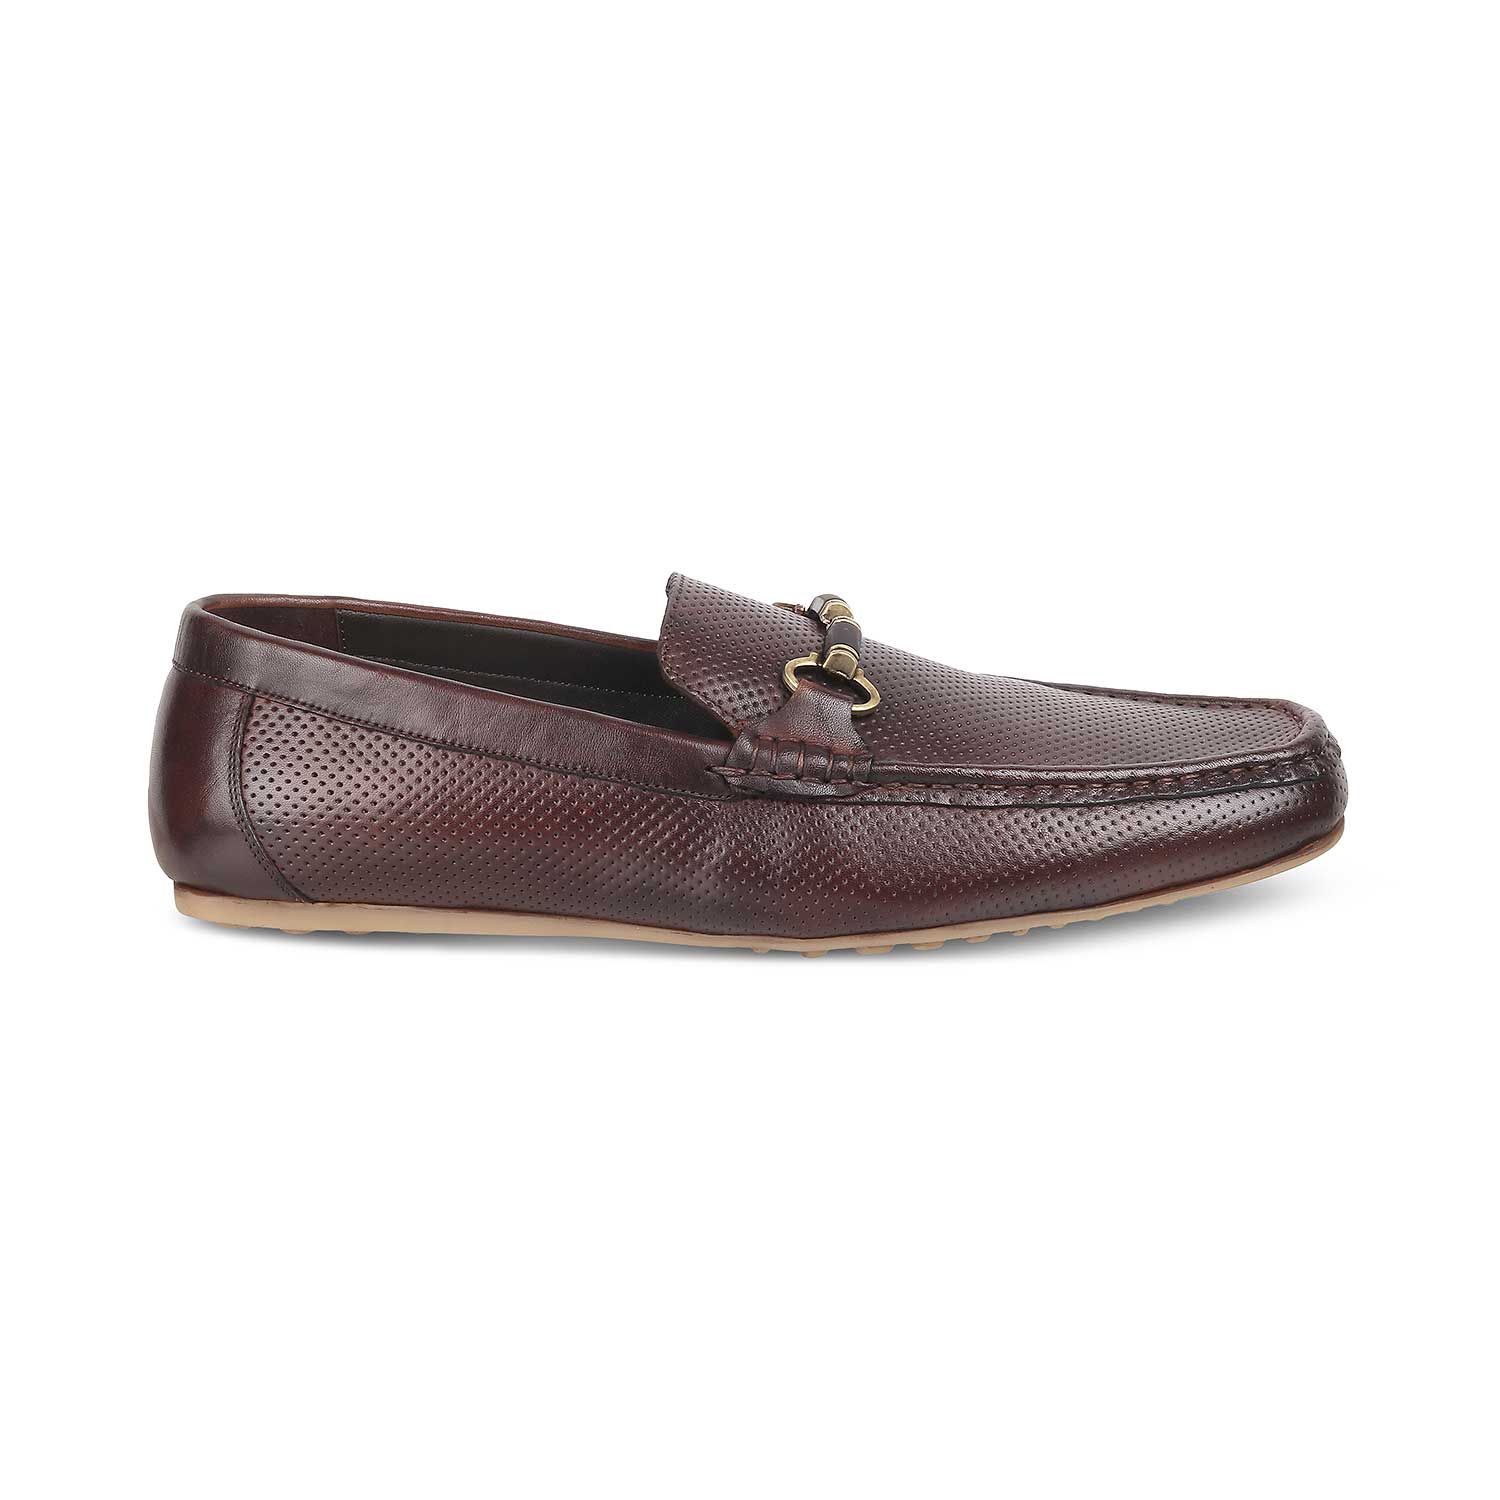 Tresmode-The Cenew Brown Men's Leather Loafers Tresmode-Tresmode